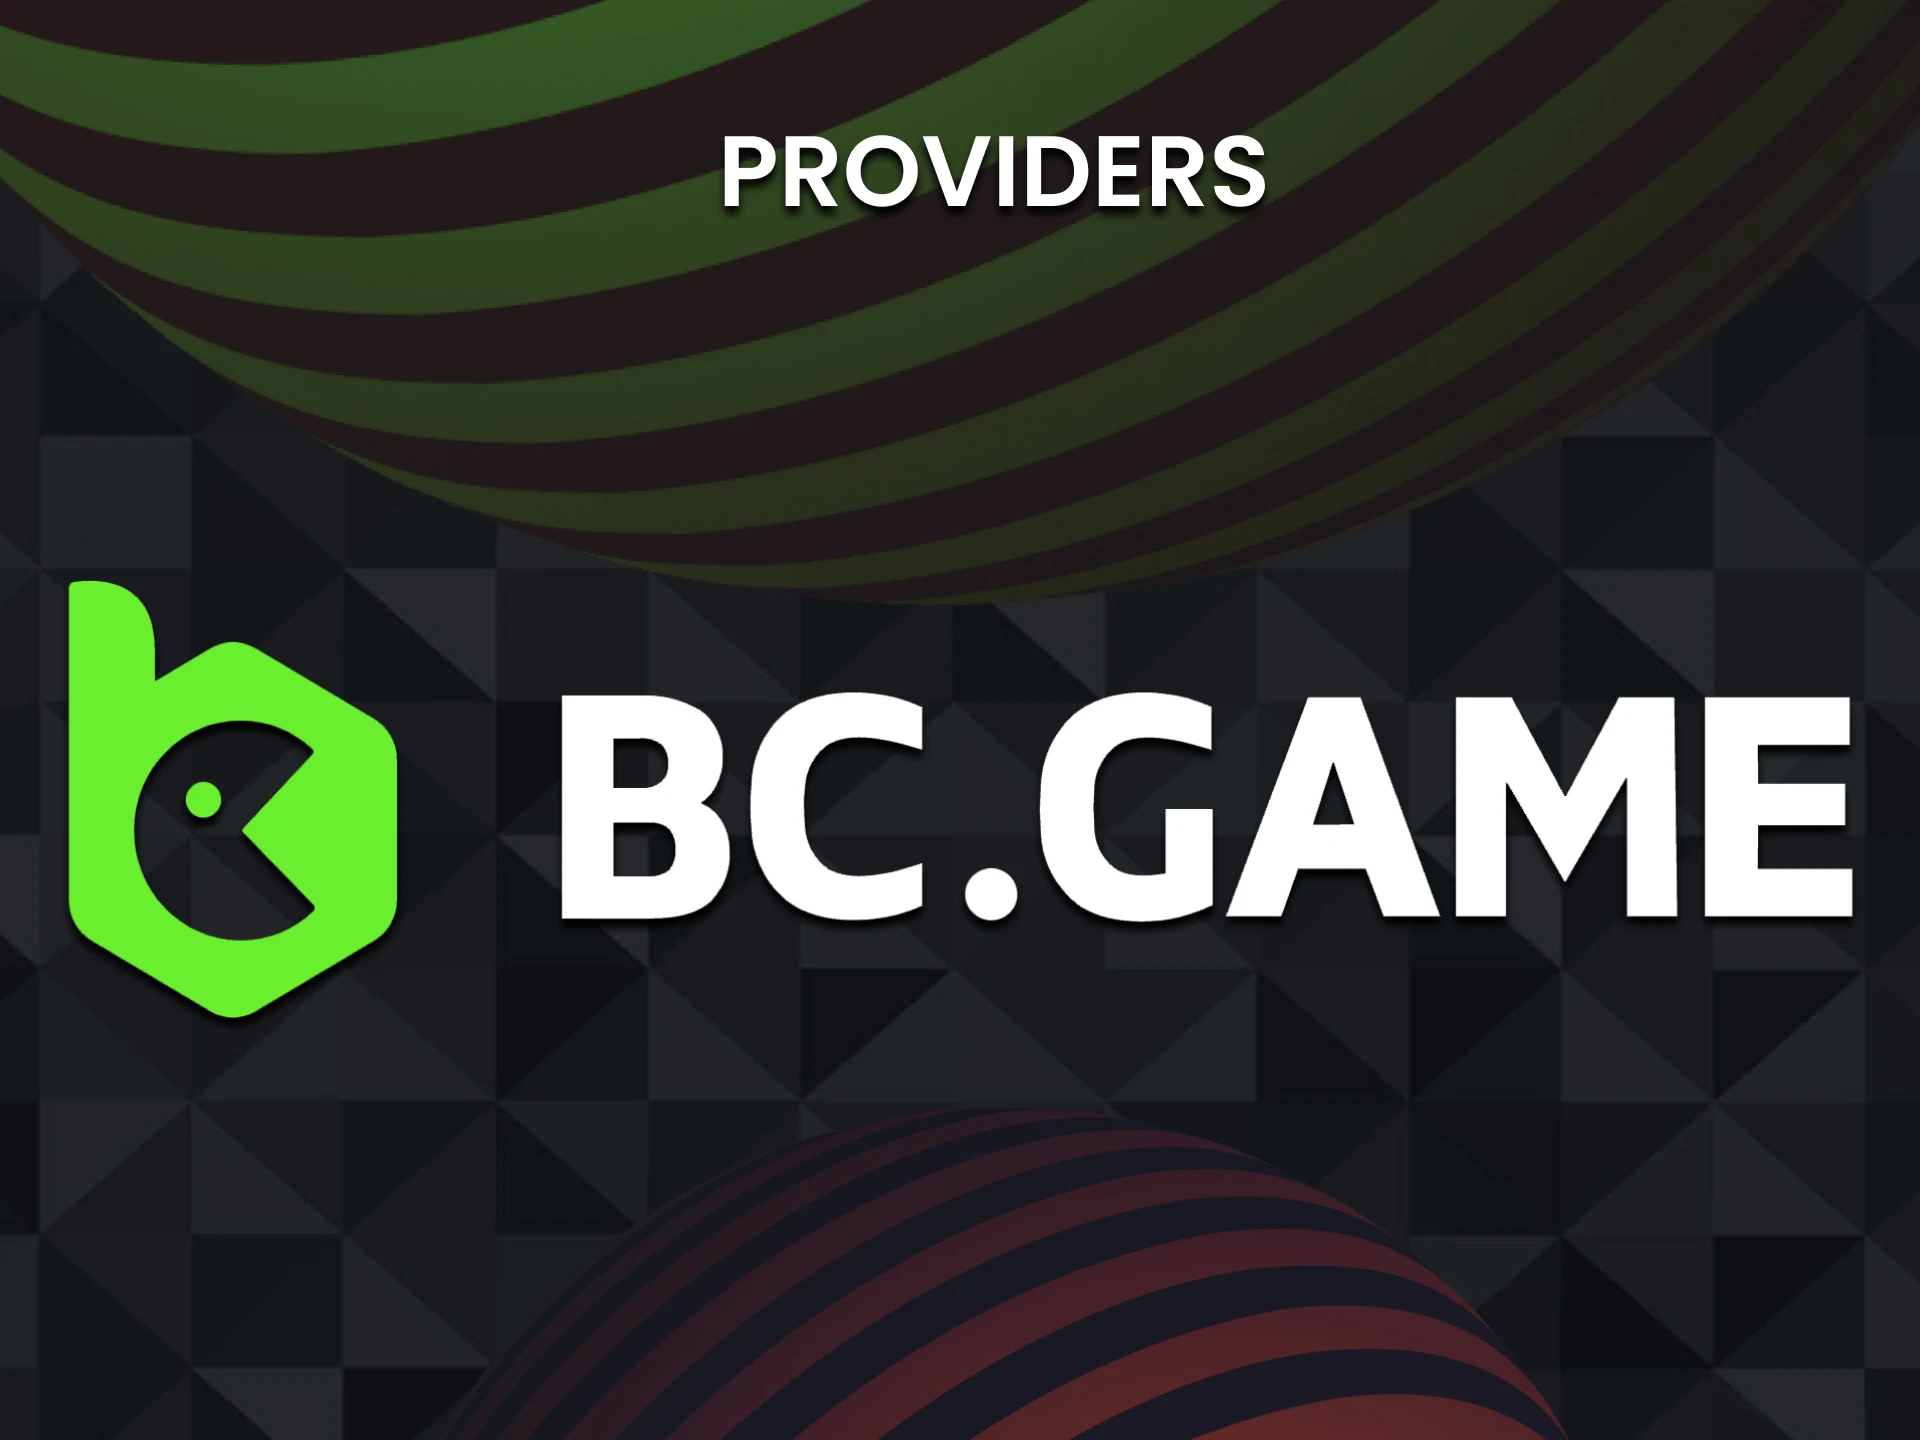 BC Game is the provider of the Originals section on its website.